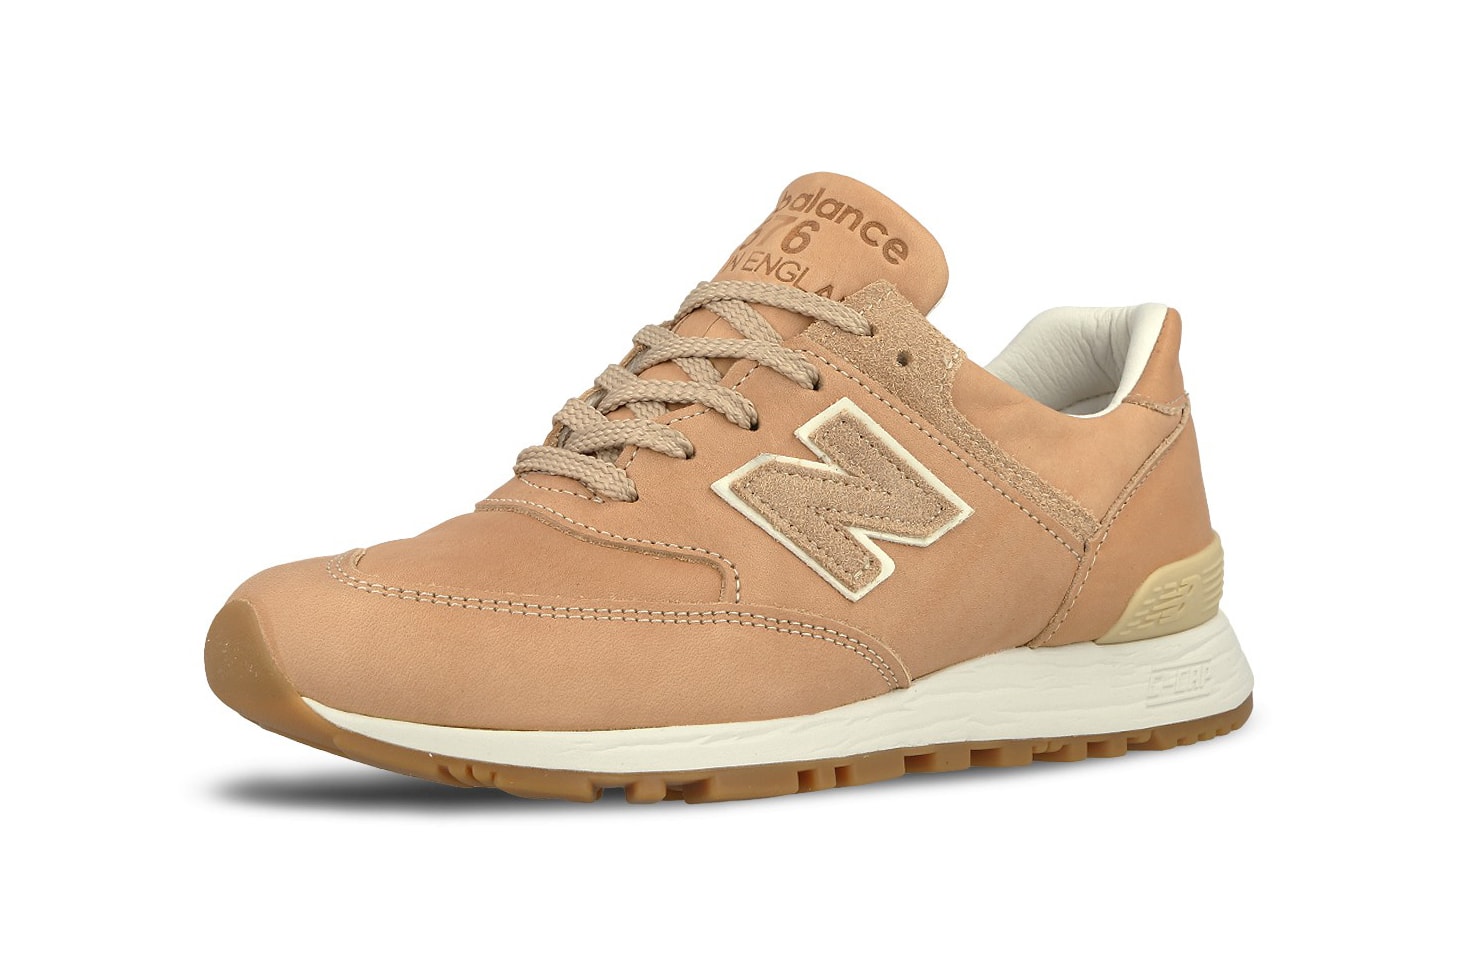 New Balance 576 Horween Leather Co Vegetable Tanned Brown